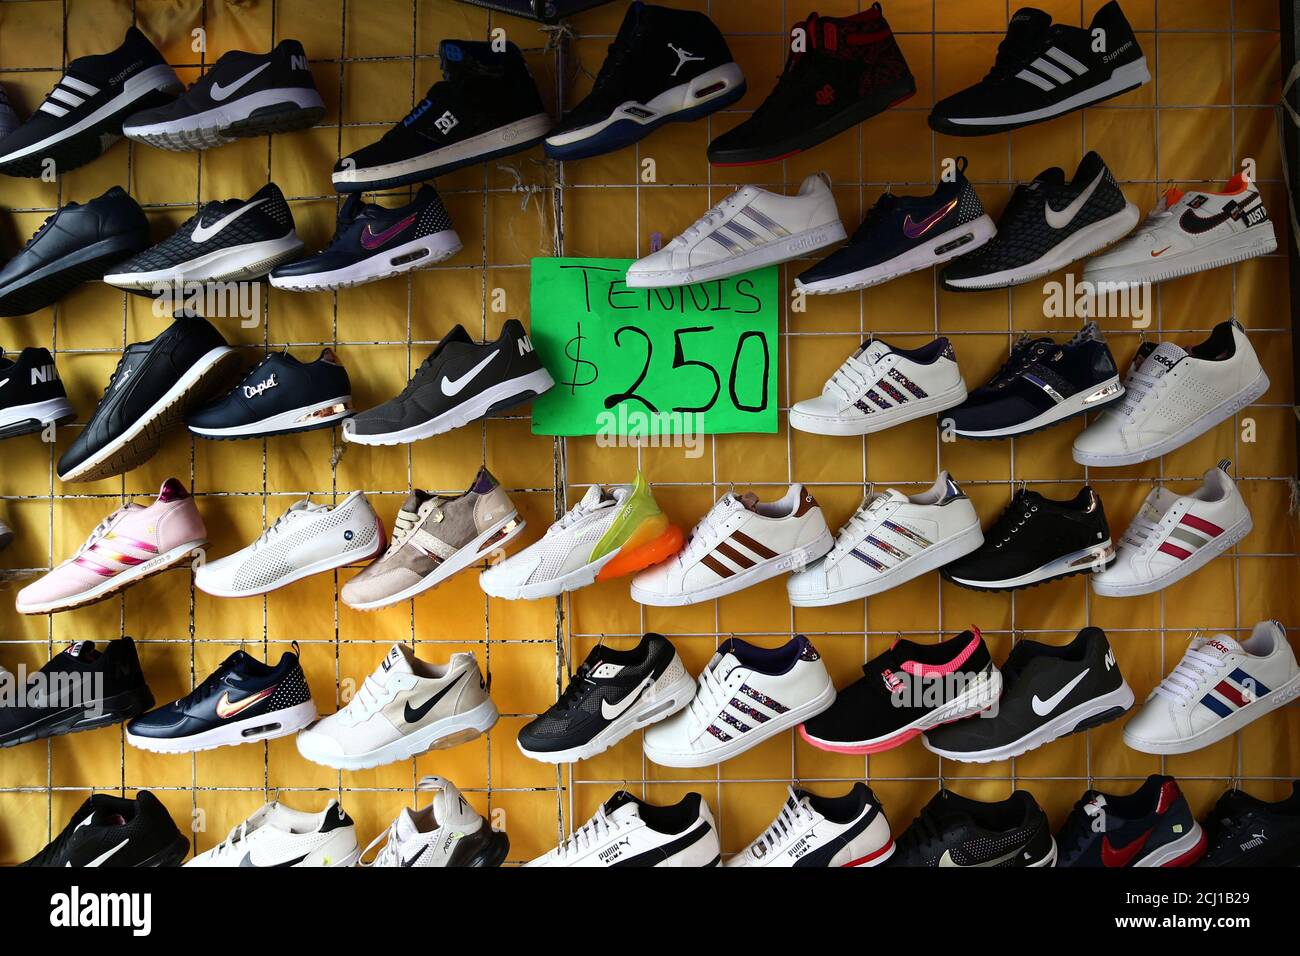 Sports shoes are displayed at a store in Tepito neighborhood in Mexico City,  Mexico May 16, 2019. REUTERS/Edgard Garrido Stock Photo - Alamy